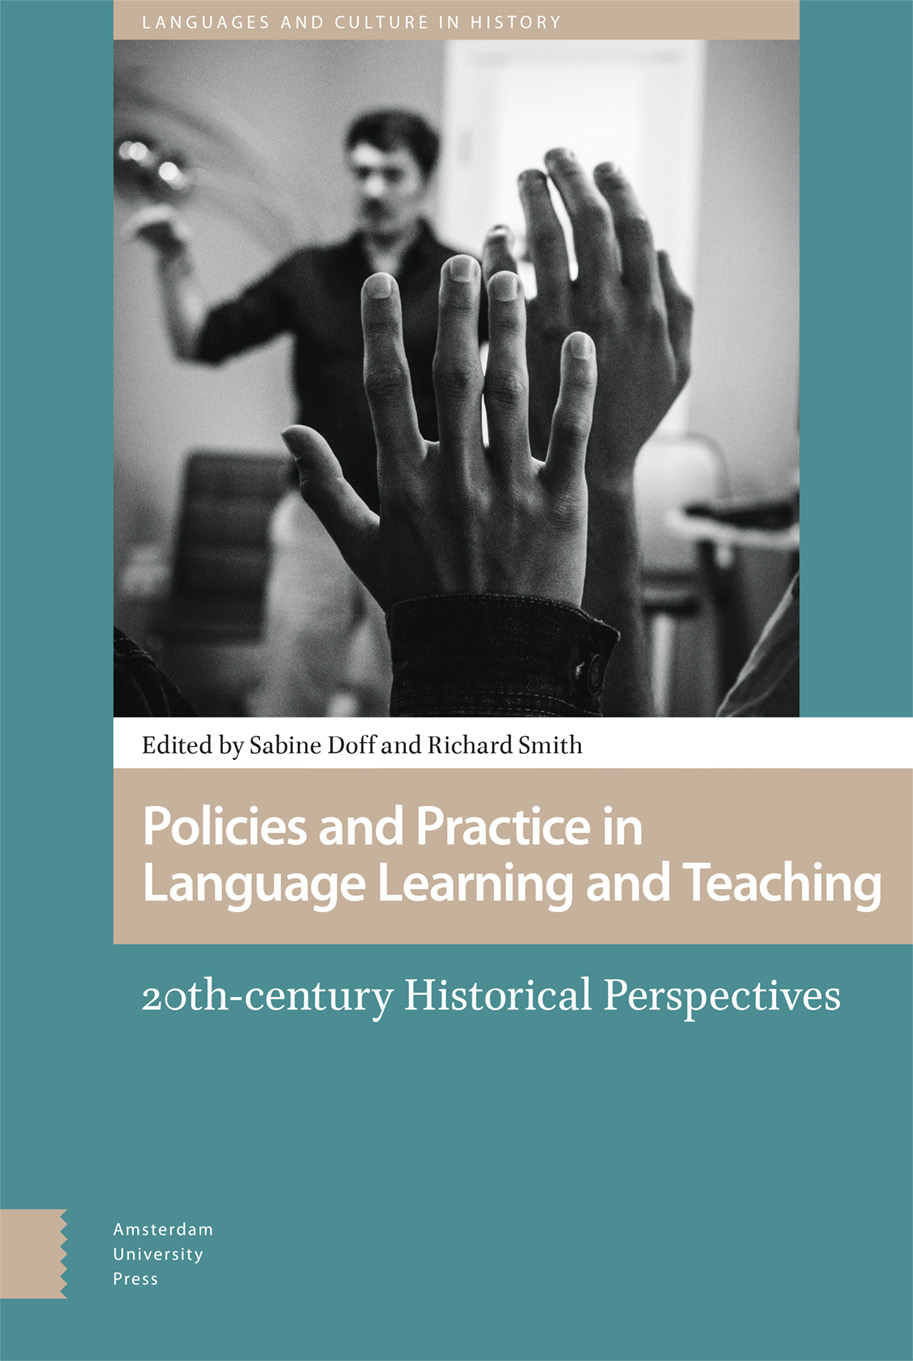 Amsterdam　University　and　in　and　Teaching　Learning　Language　Practice　Policies　Press